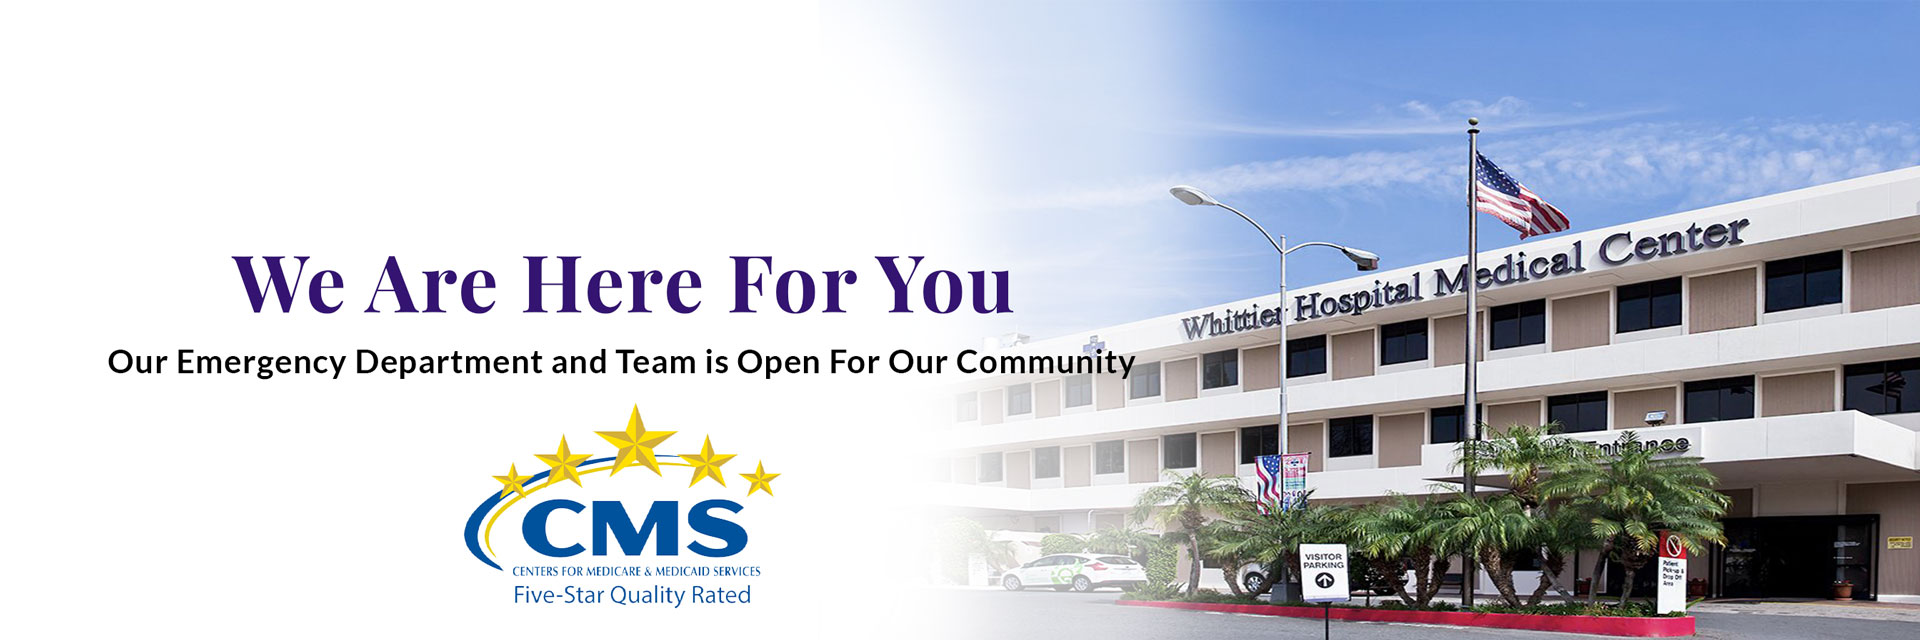 Ad showing the hospital saying We Are Here For You
Our Emergency Department and Team is Open For Our Community